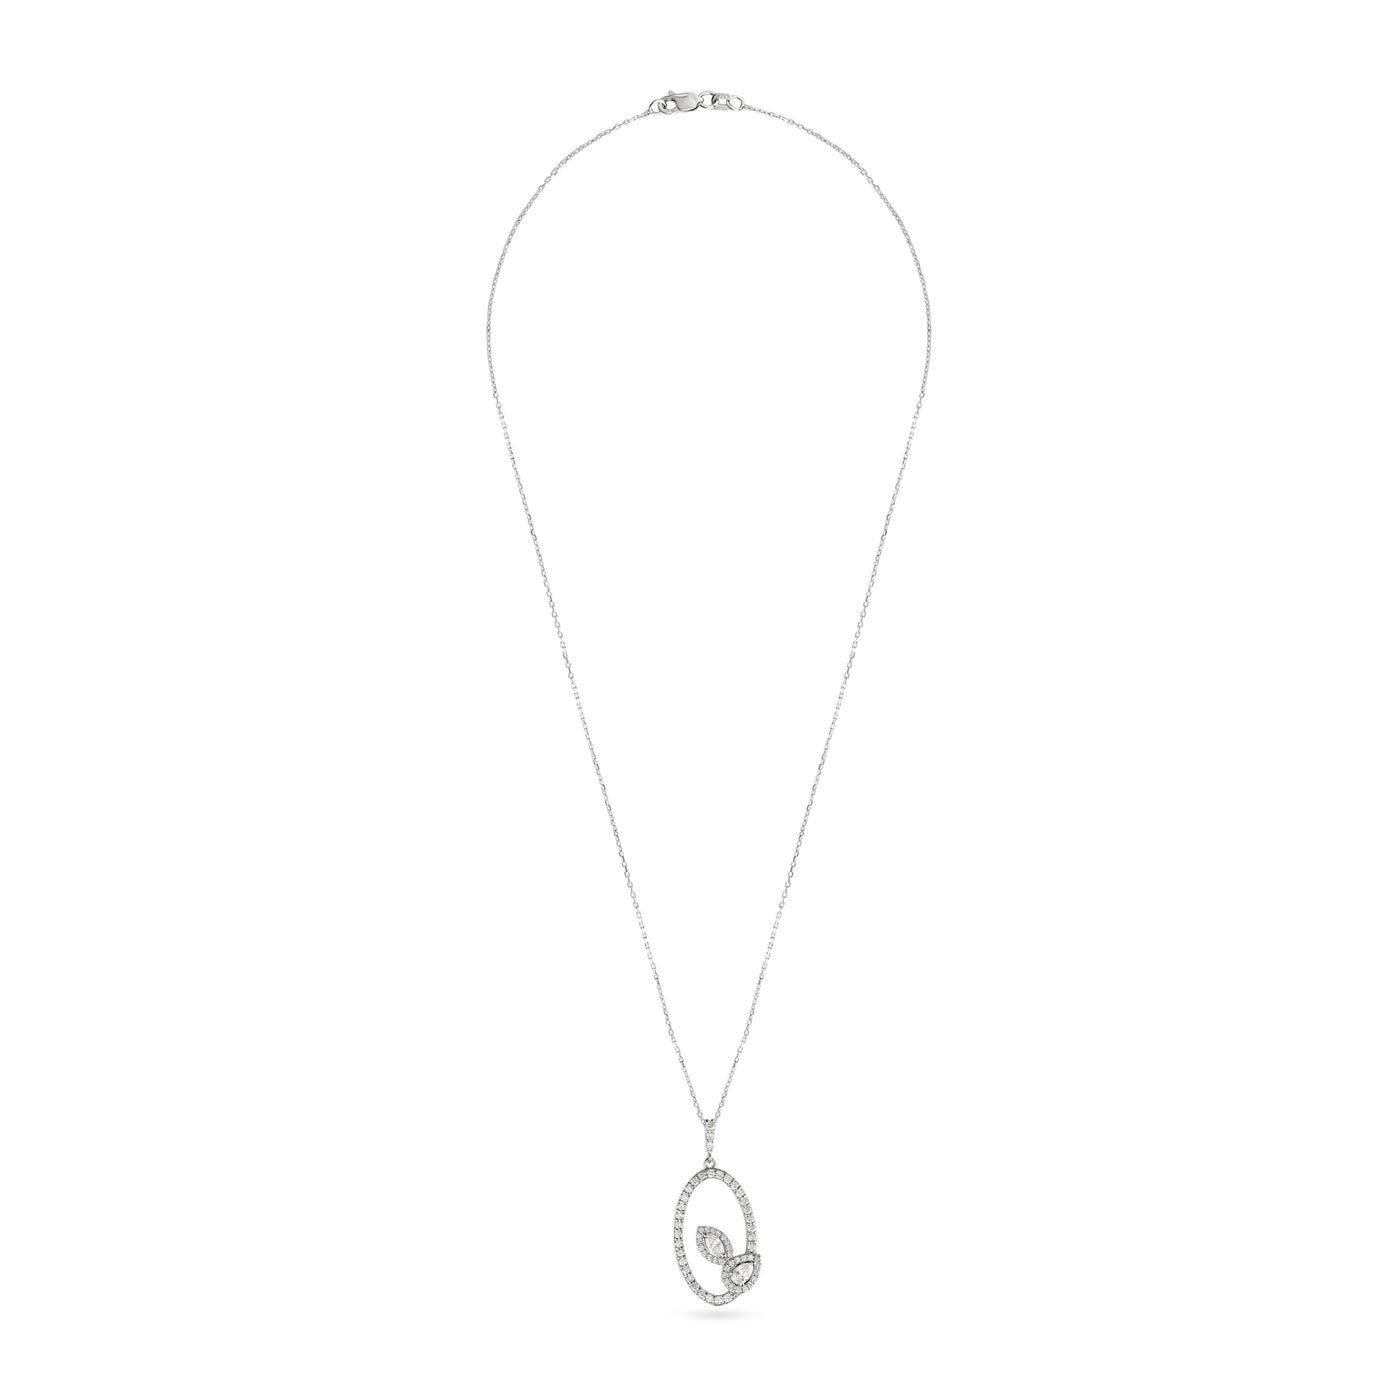 Soit Belle White Gold Oval with Leaves Diamond Pendant: Nature's Delicate Beauty.